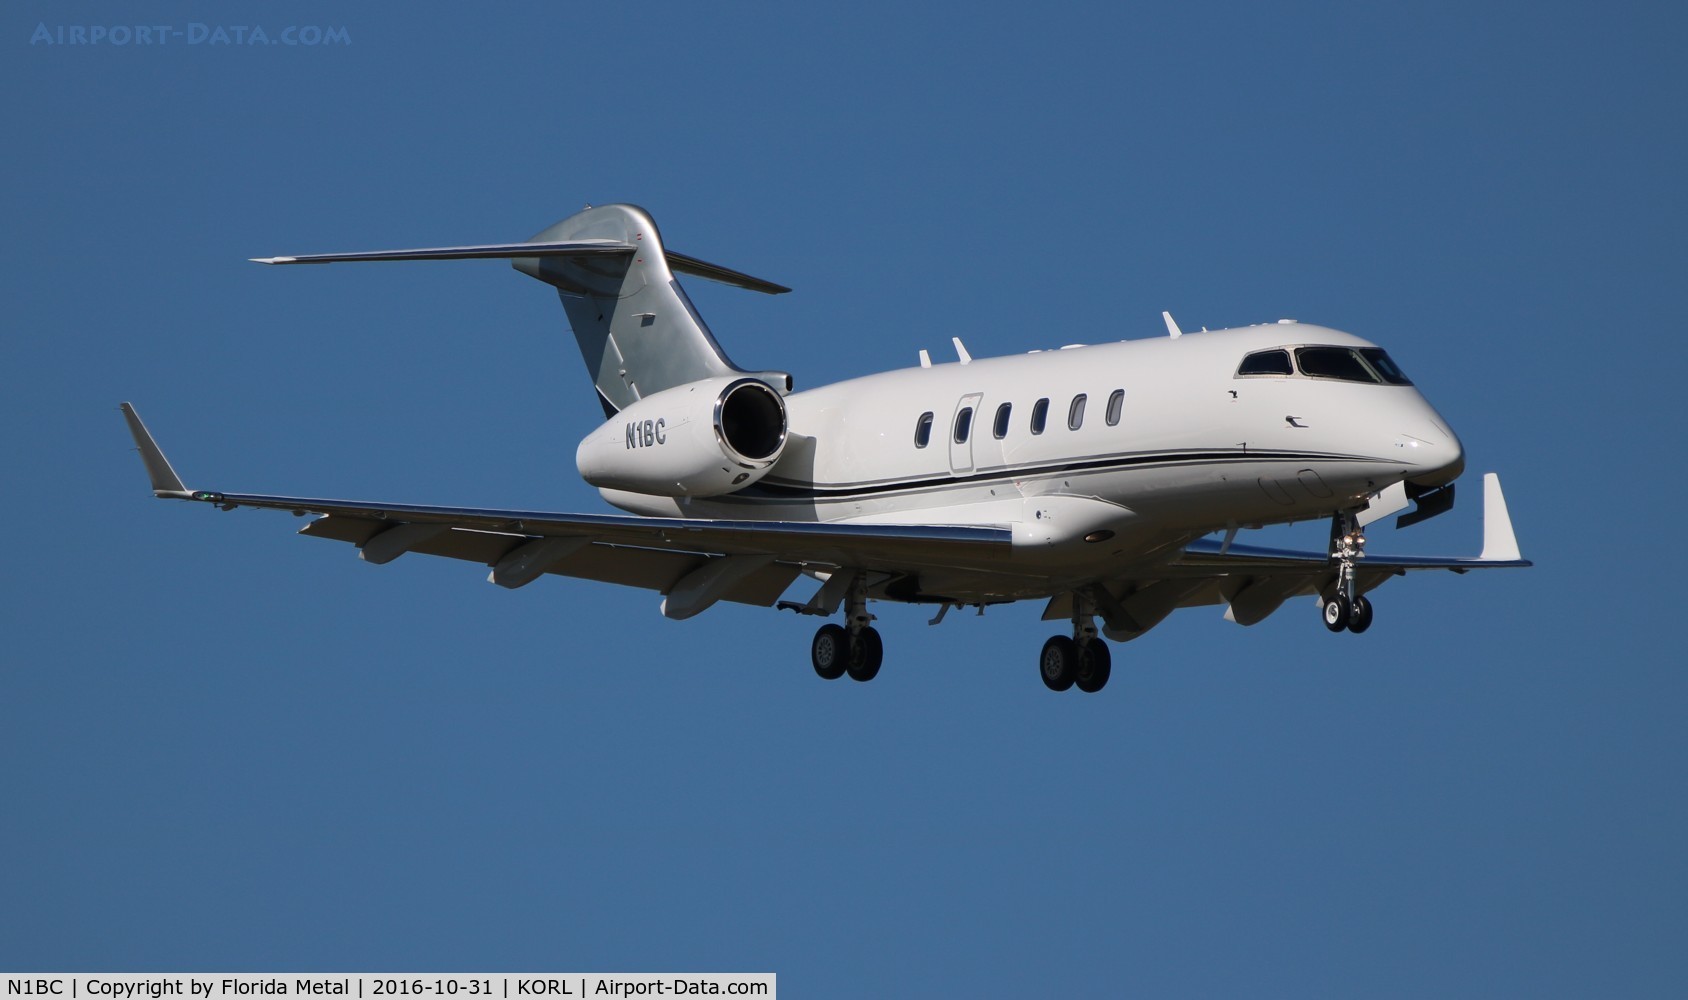 N1BC, 2011 Bombardier Challenger 300 (BD-100-1A10) C/N 20335, Challenger 300 zx